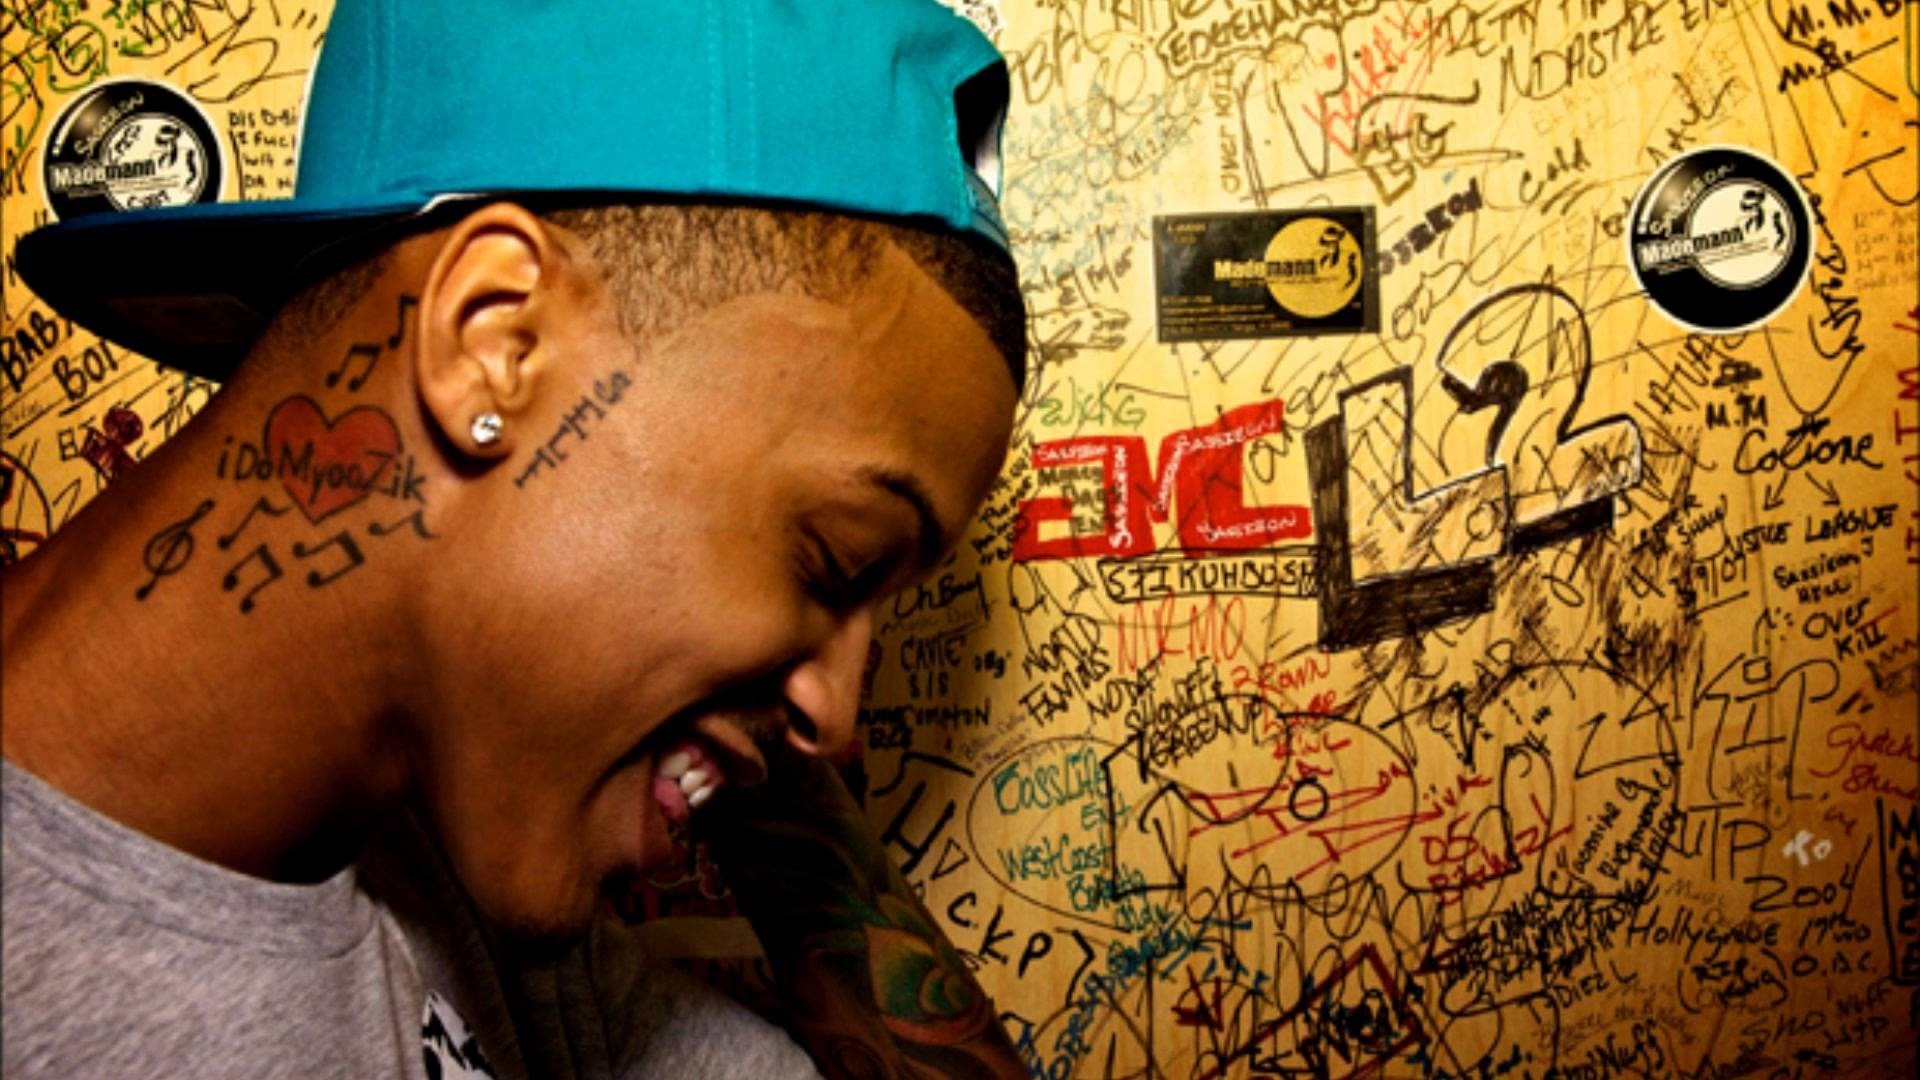 1920x1080 august alsina screensavers and backgrounds free